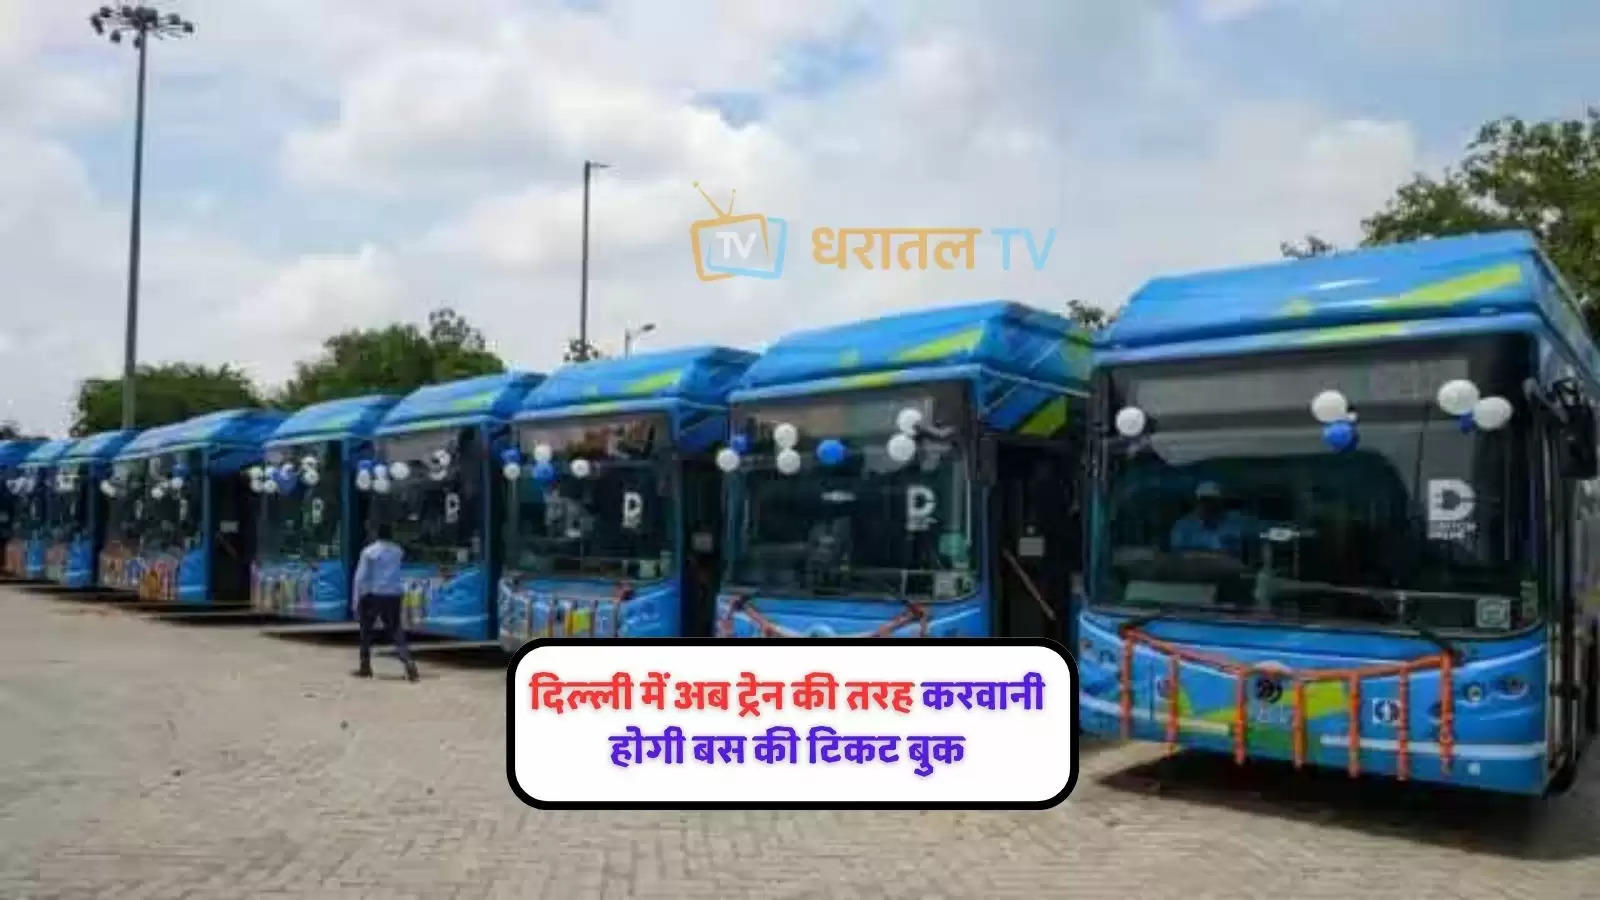 story-delhi-govt-to-launch-premium-intra-city-buses-with-seats-blocking-facility-